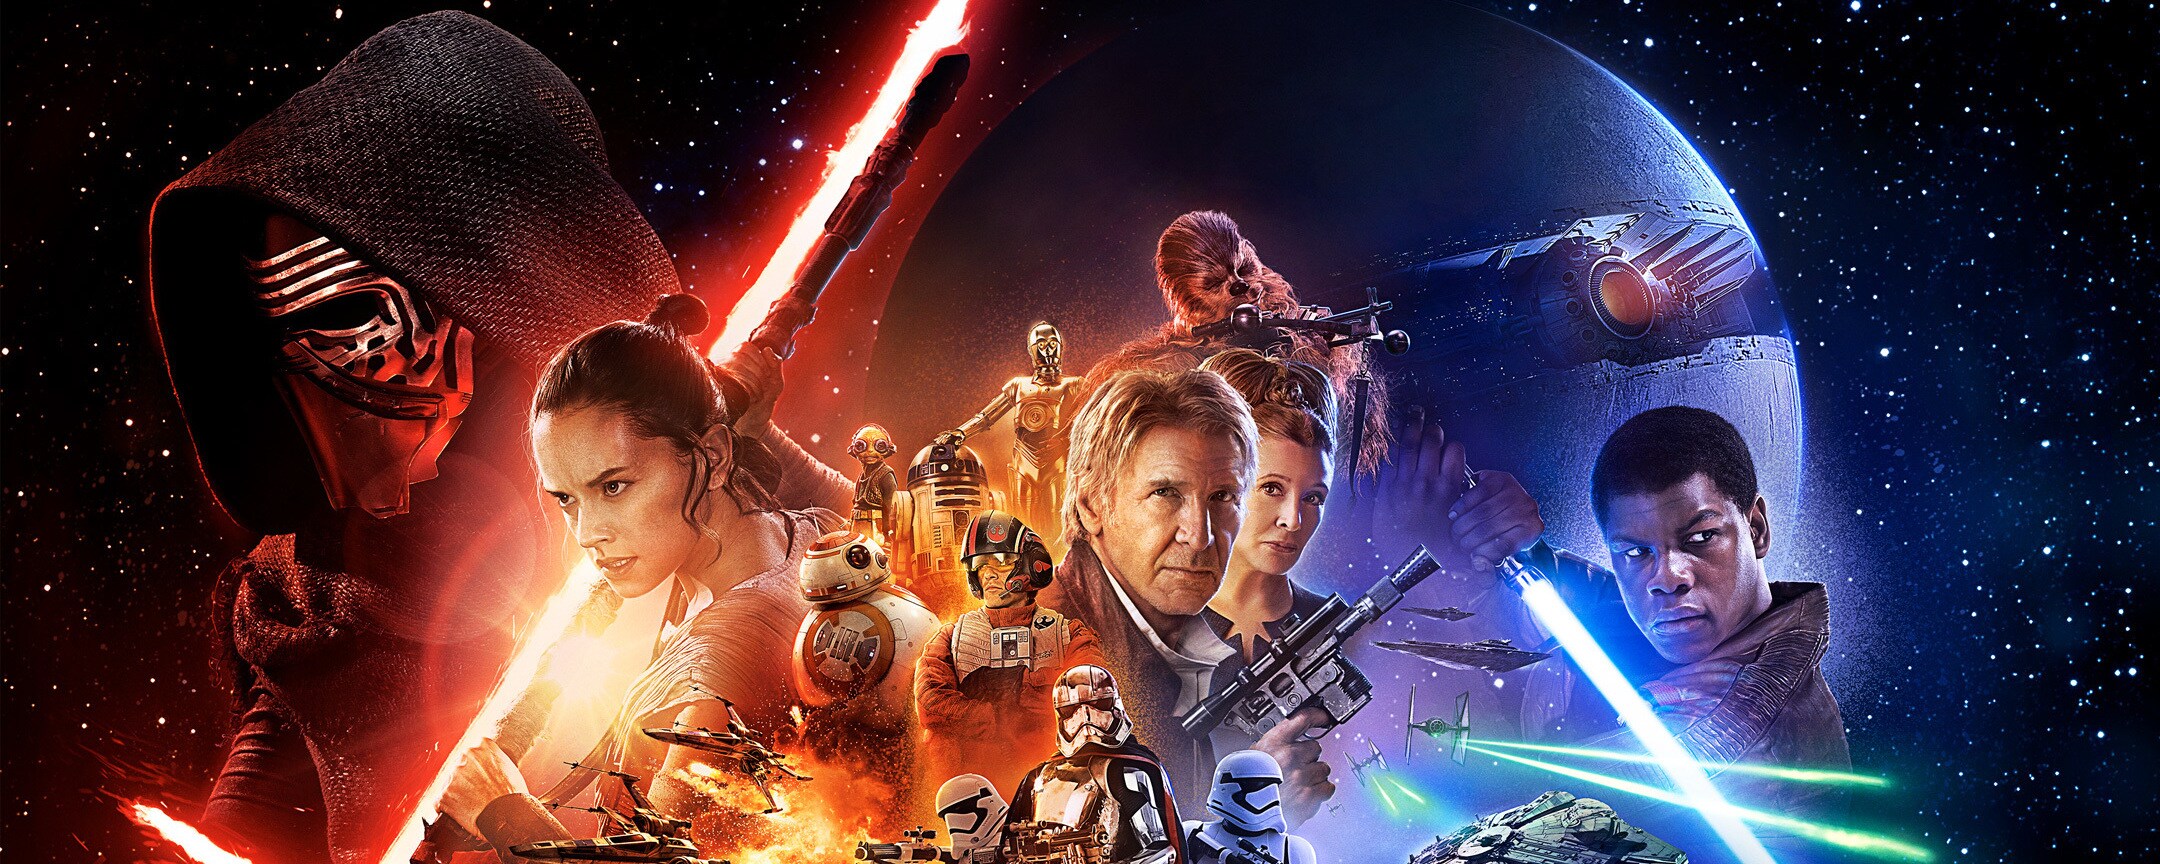 Fortære svært Uenighed Star Wars: The Force Awakens Theatrical Poster First Look, In-theater  Exclusives and More | StarWars.com